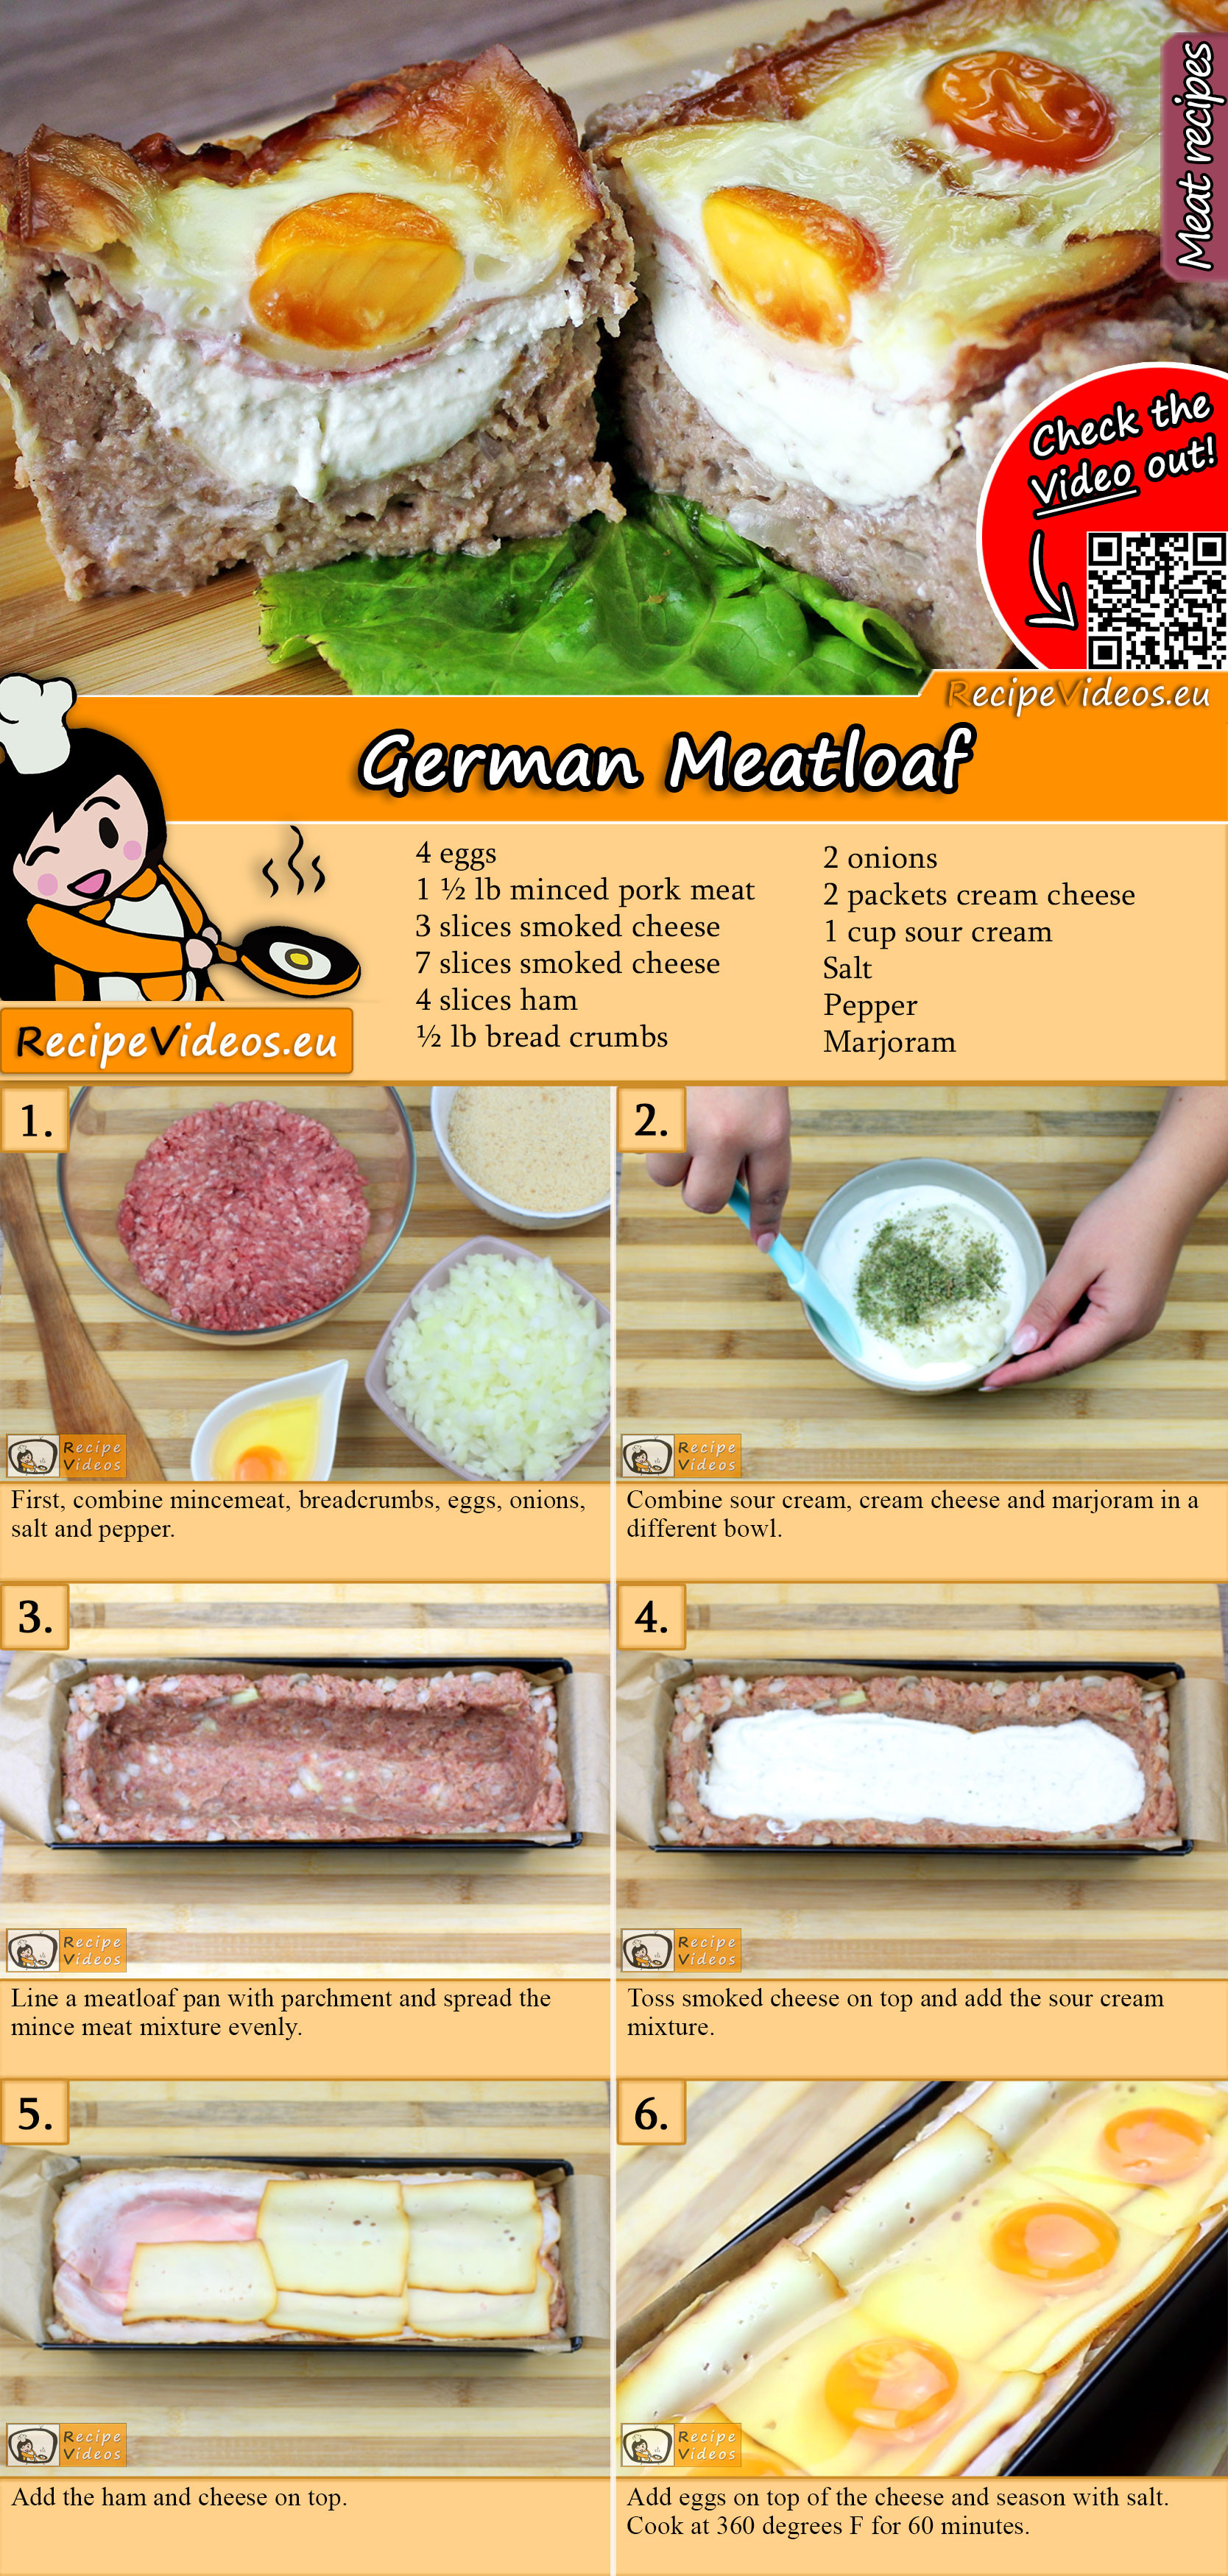 German Meatloaf recipe with video